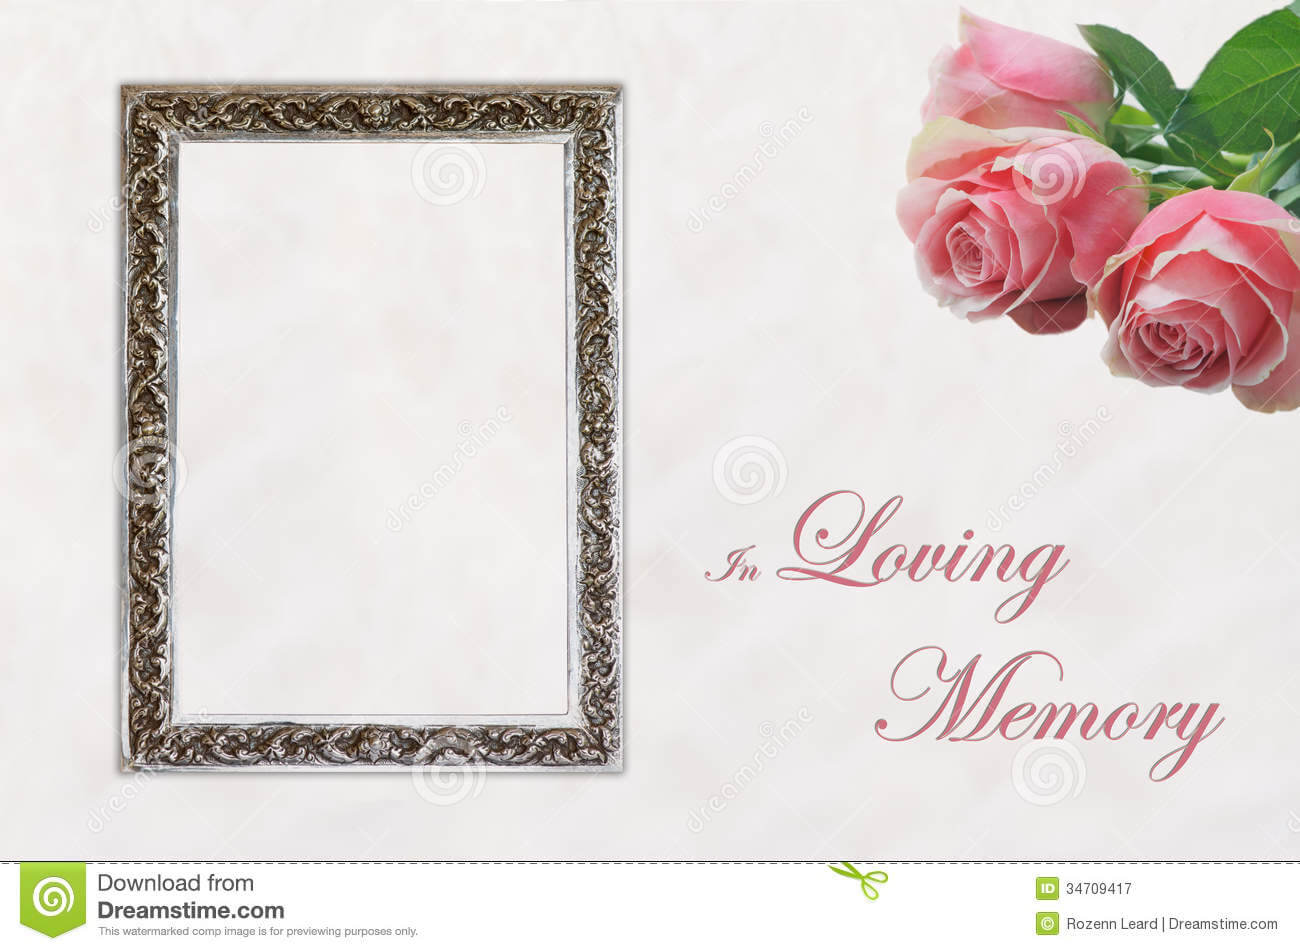 In Memory Cards Templates ] – Memory Template 4 Celebration Pertaining To In Memory Cards Templates